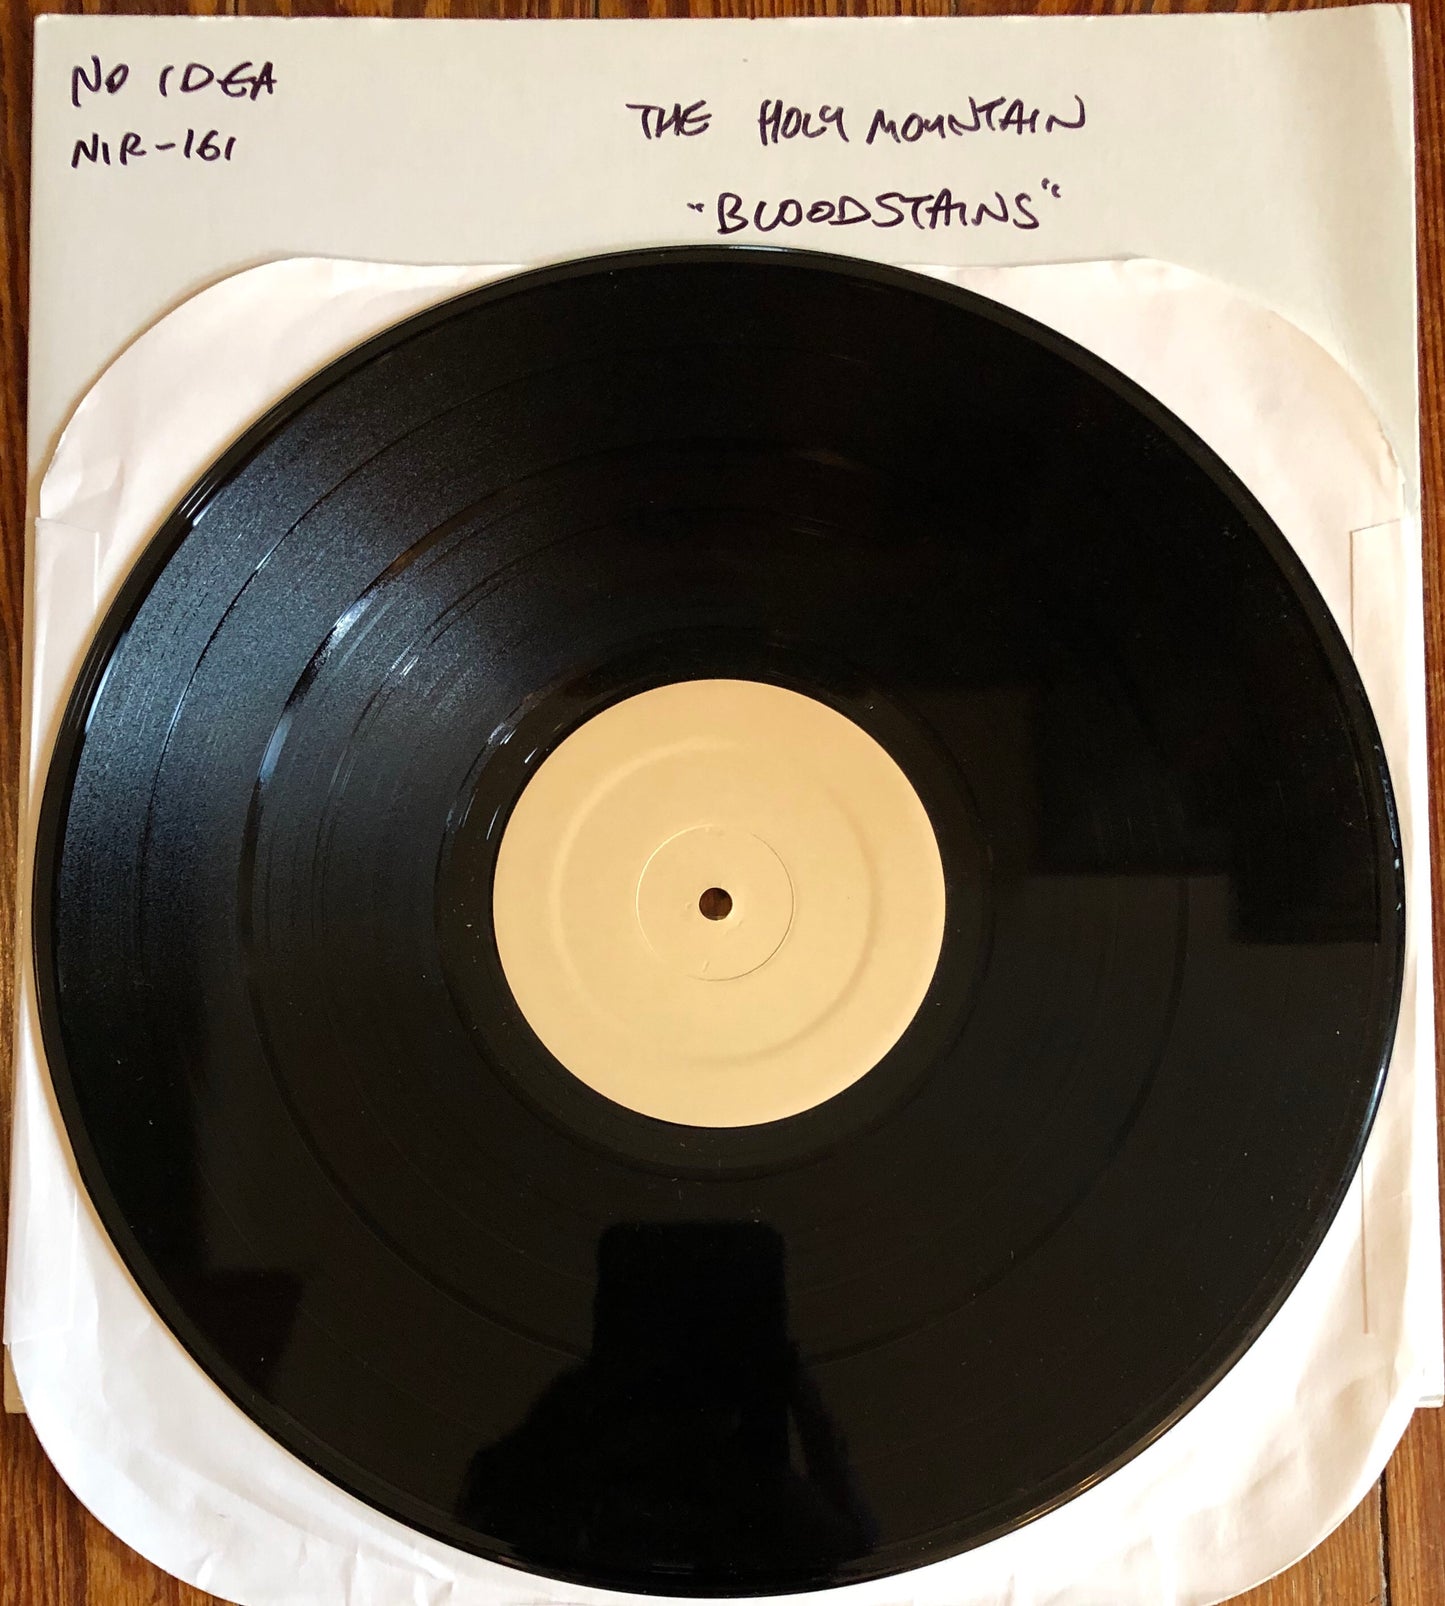 HOLY MOUNTAIN, THE "Bloodstains Across Your Face" TEST PRESSING